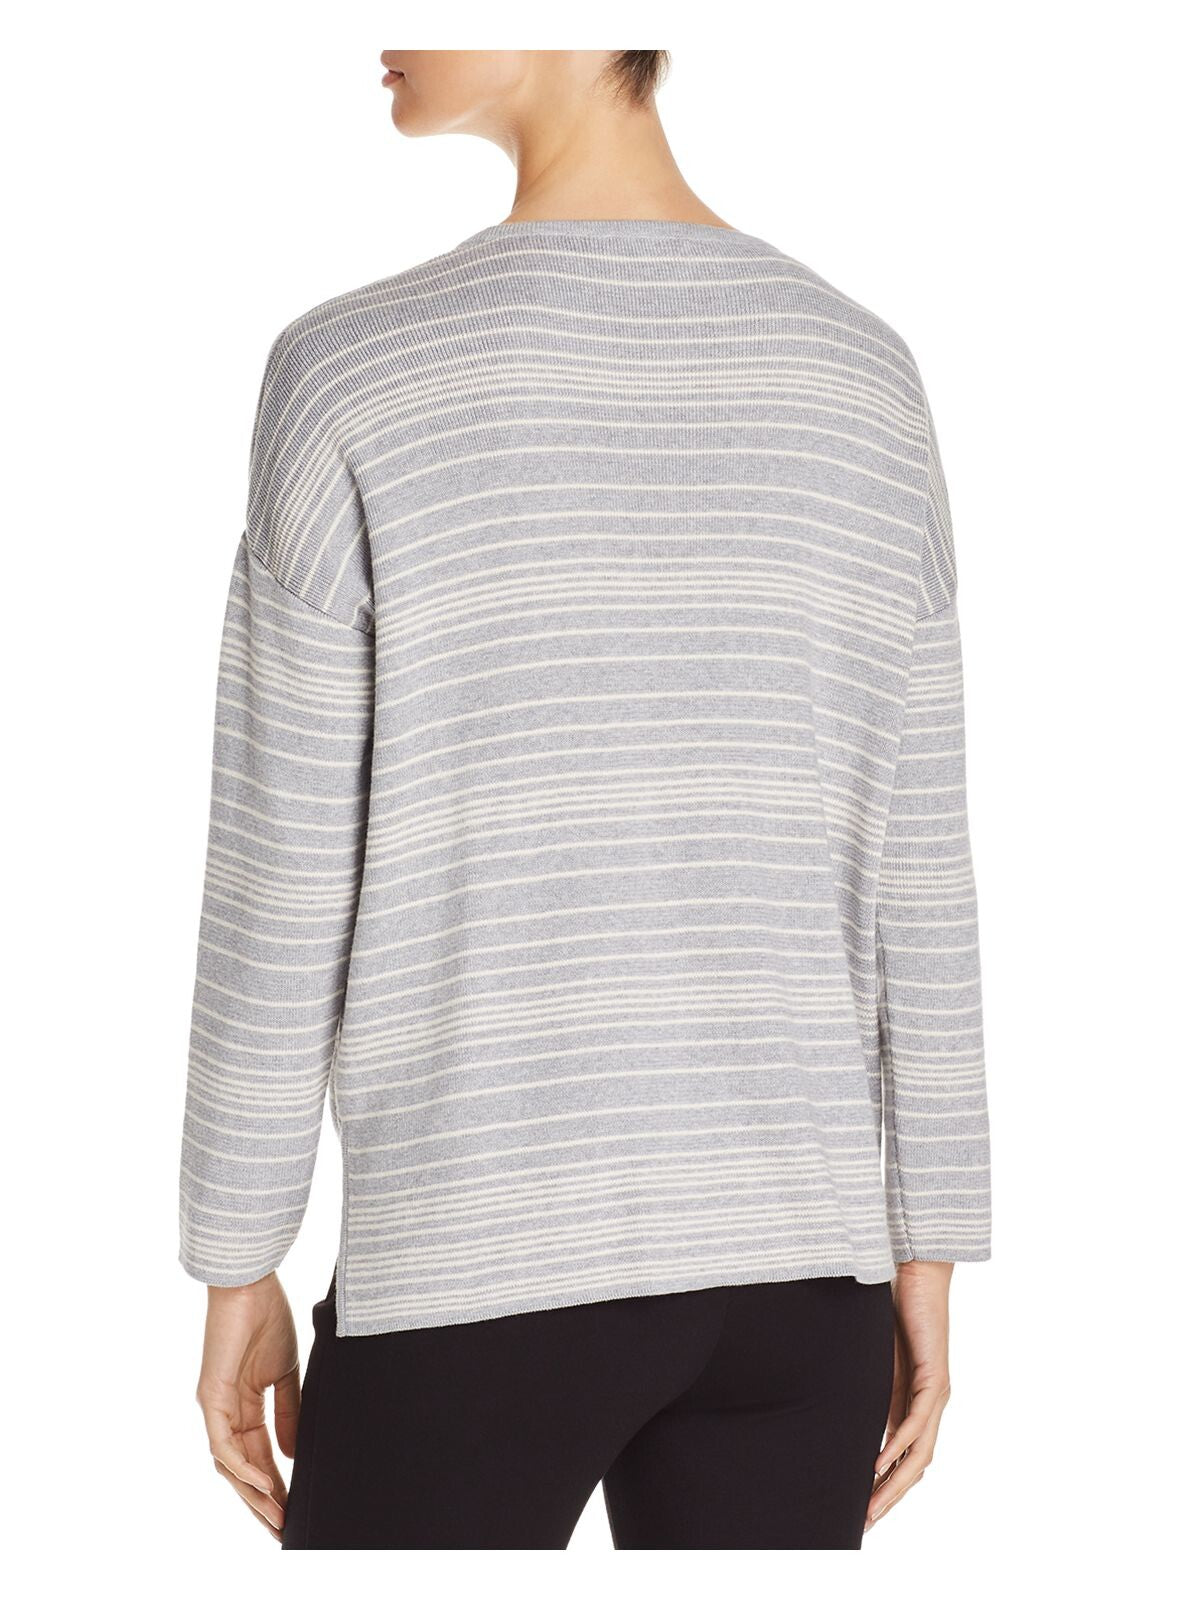 EILEEN FISHER Womens Gray Ribbed Vented Hem Striped Long Sleeve Jewel Neck Sweater Plus 1X